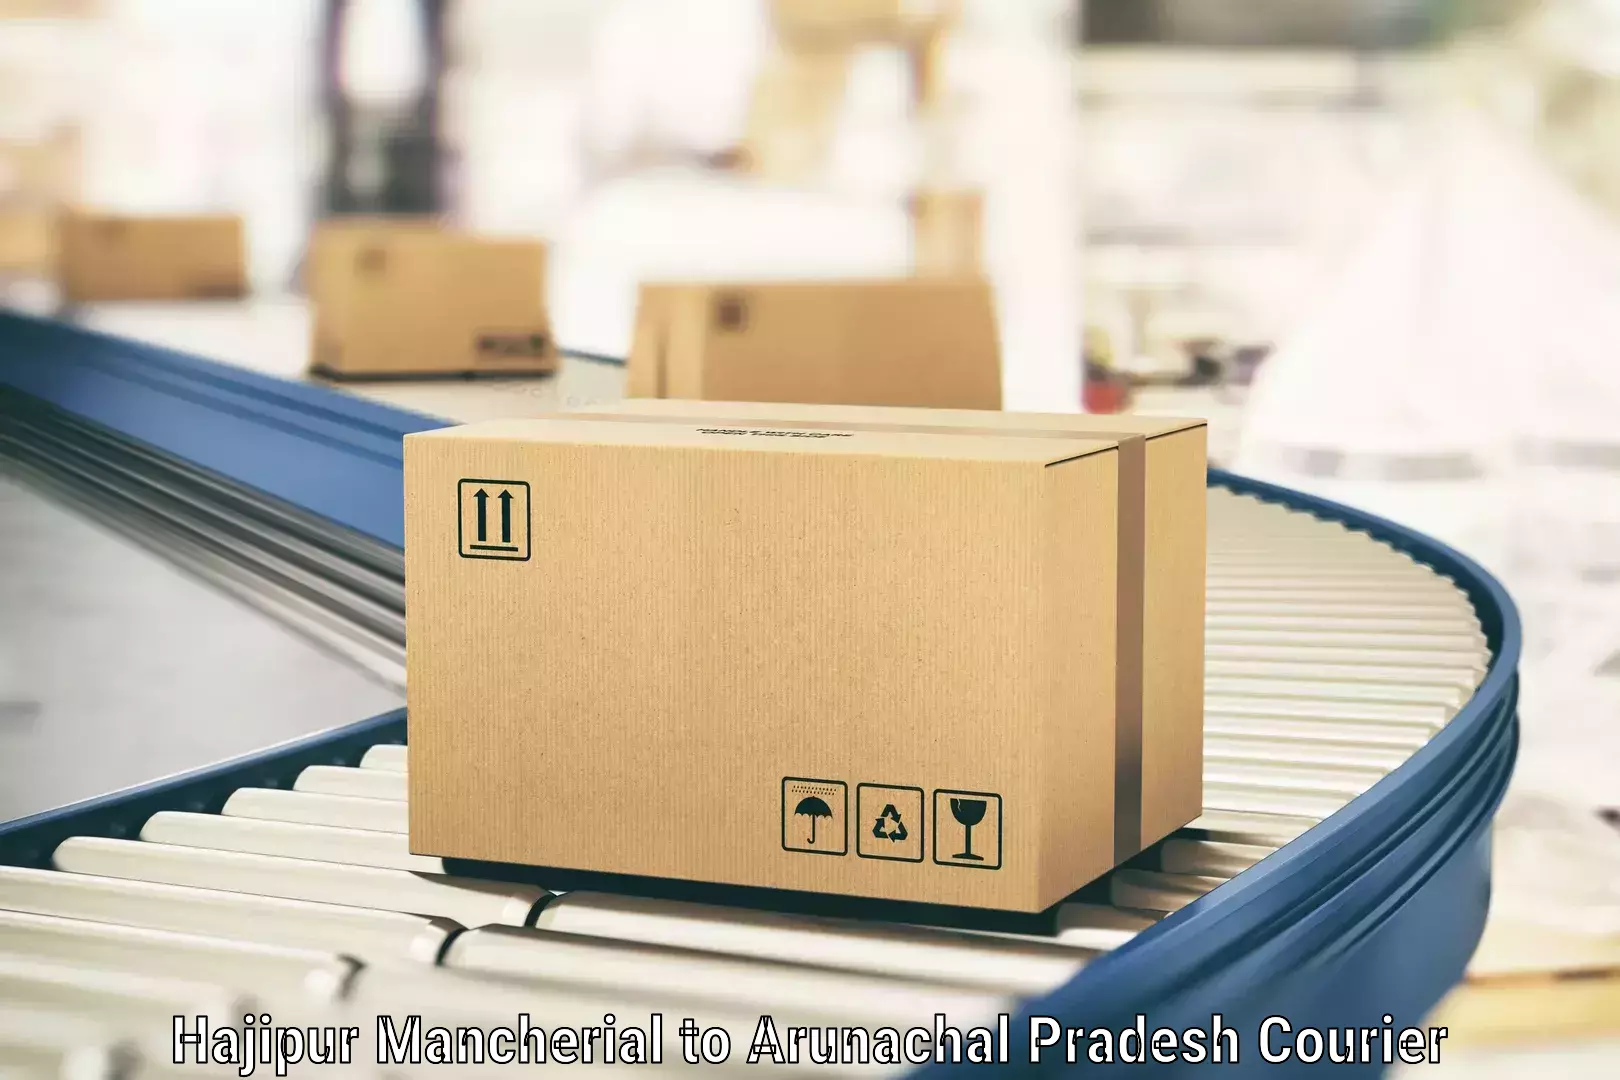 Same-day delivery solutions Hajipur Mancherial to Nirjuli